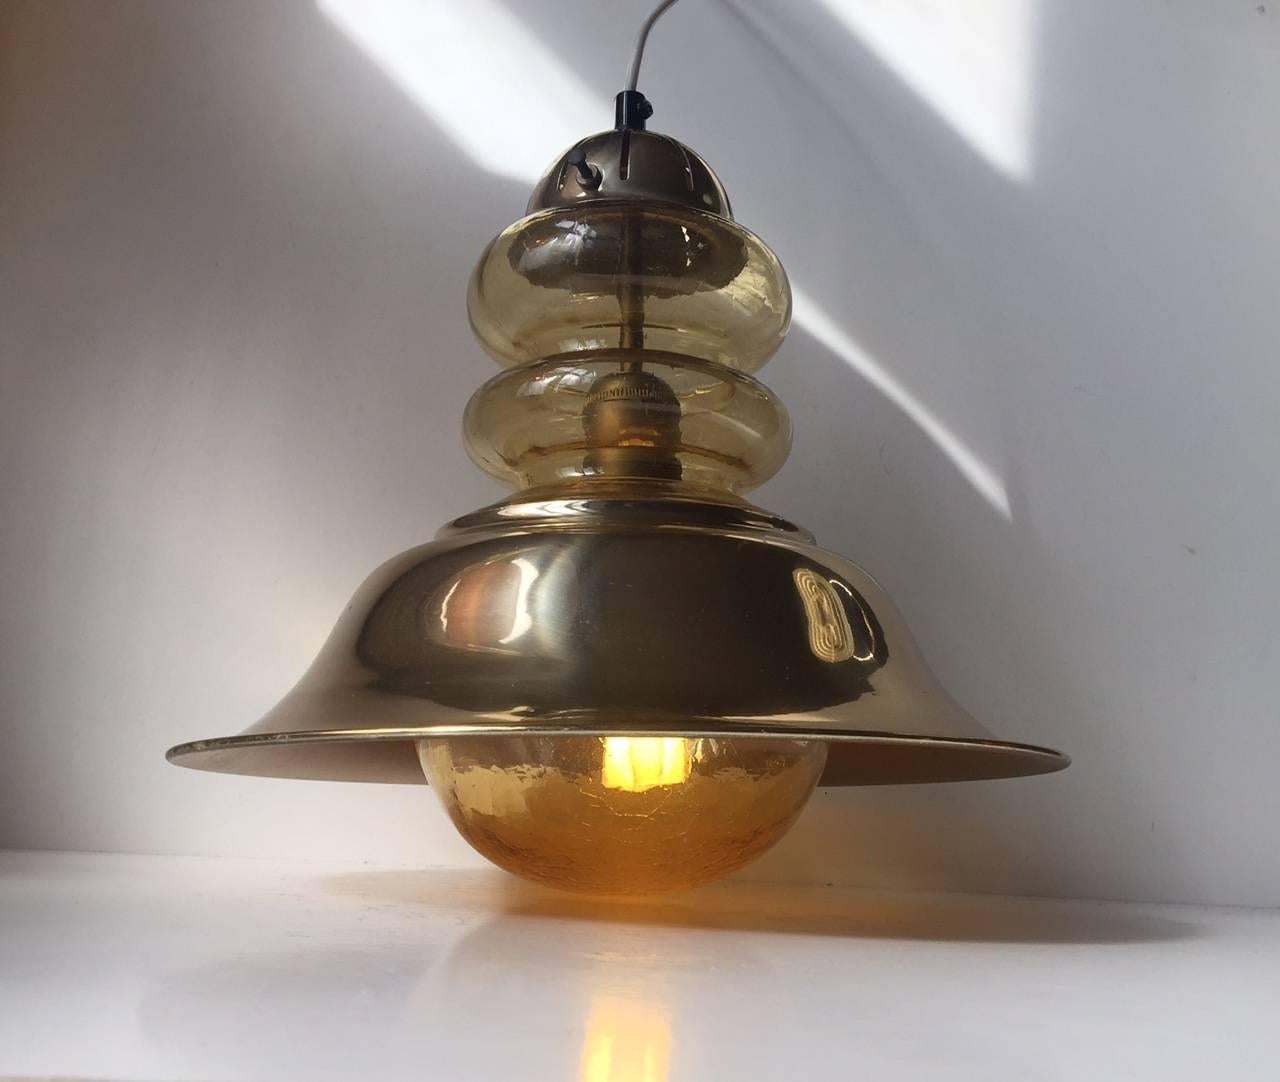 Beatifully made Mid-Century pendant ceiling lamp by Vitrika in Denmark. The style is Nautical/Maritime and it will add a cosy twist to any modern interior. The light is in a very nice vintage condition with a litlle ware and patination to the solid